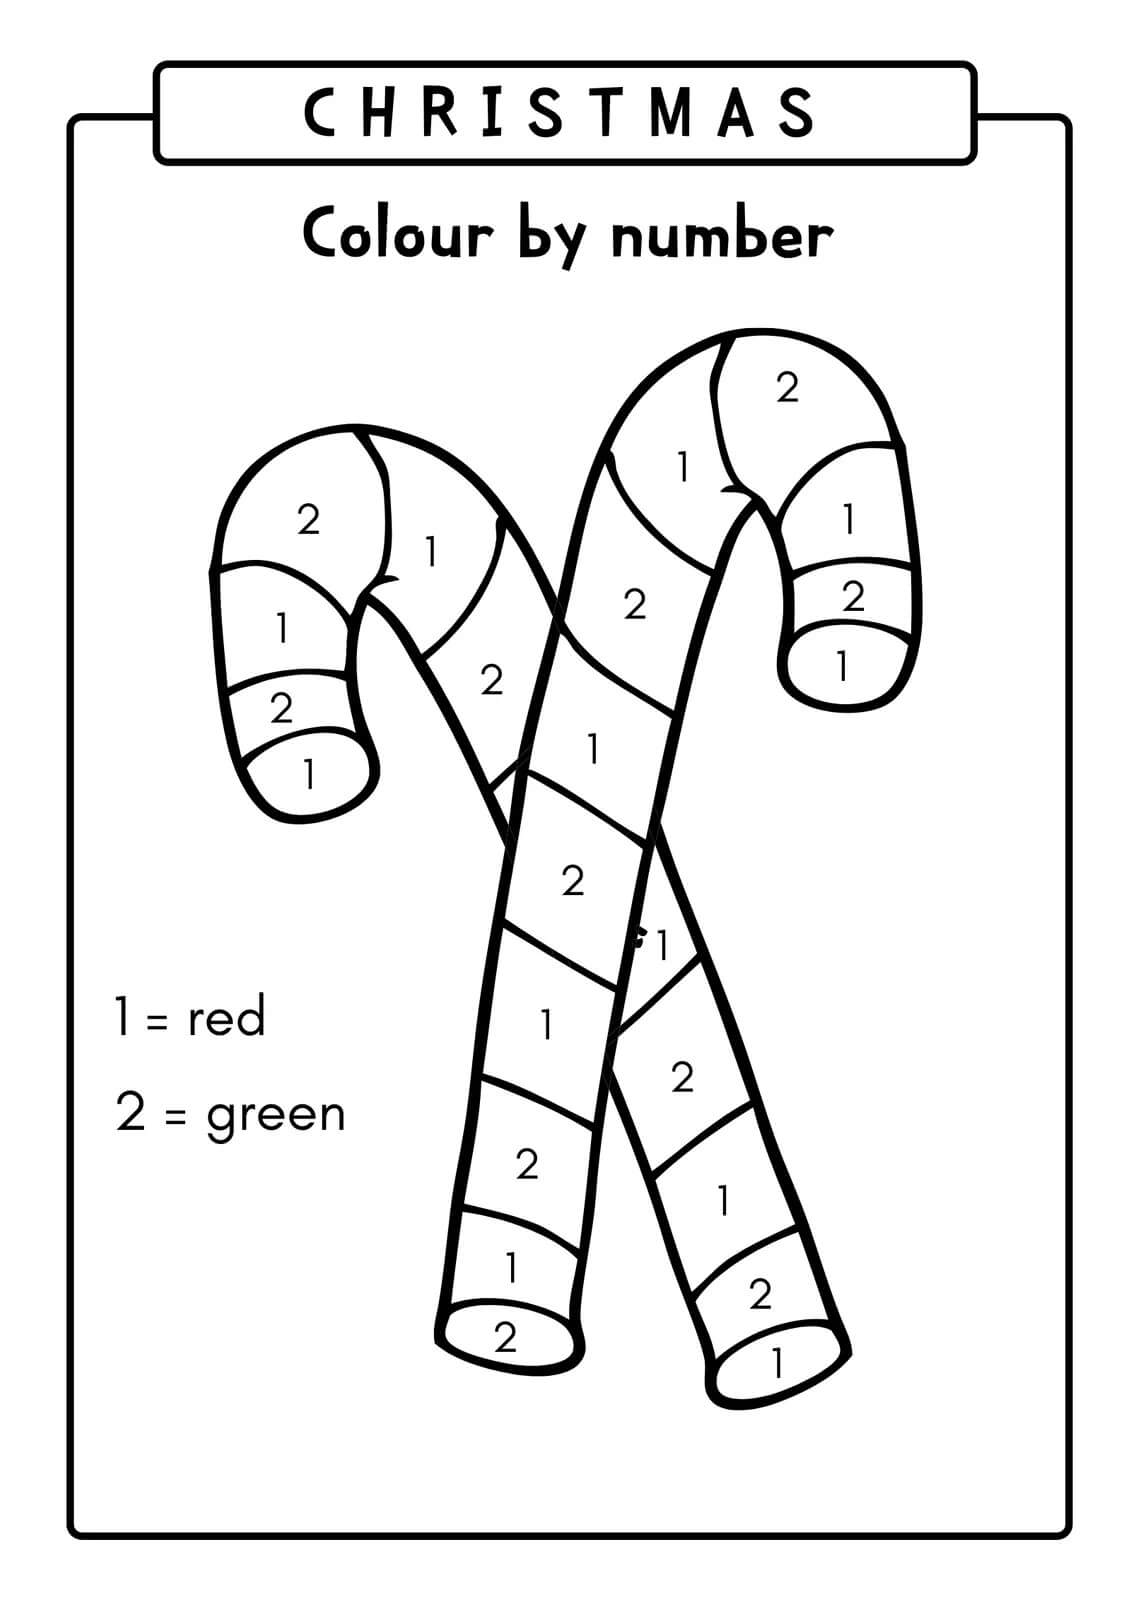 Two Christmas Candy Canes Color By Number